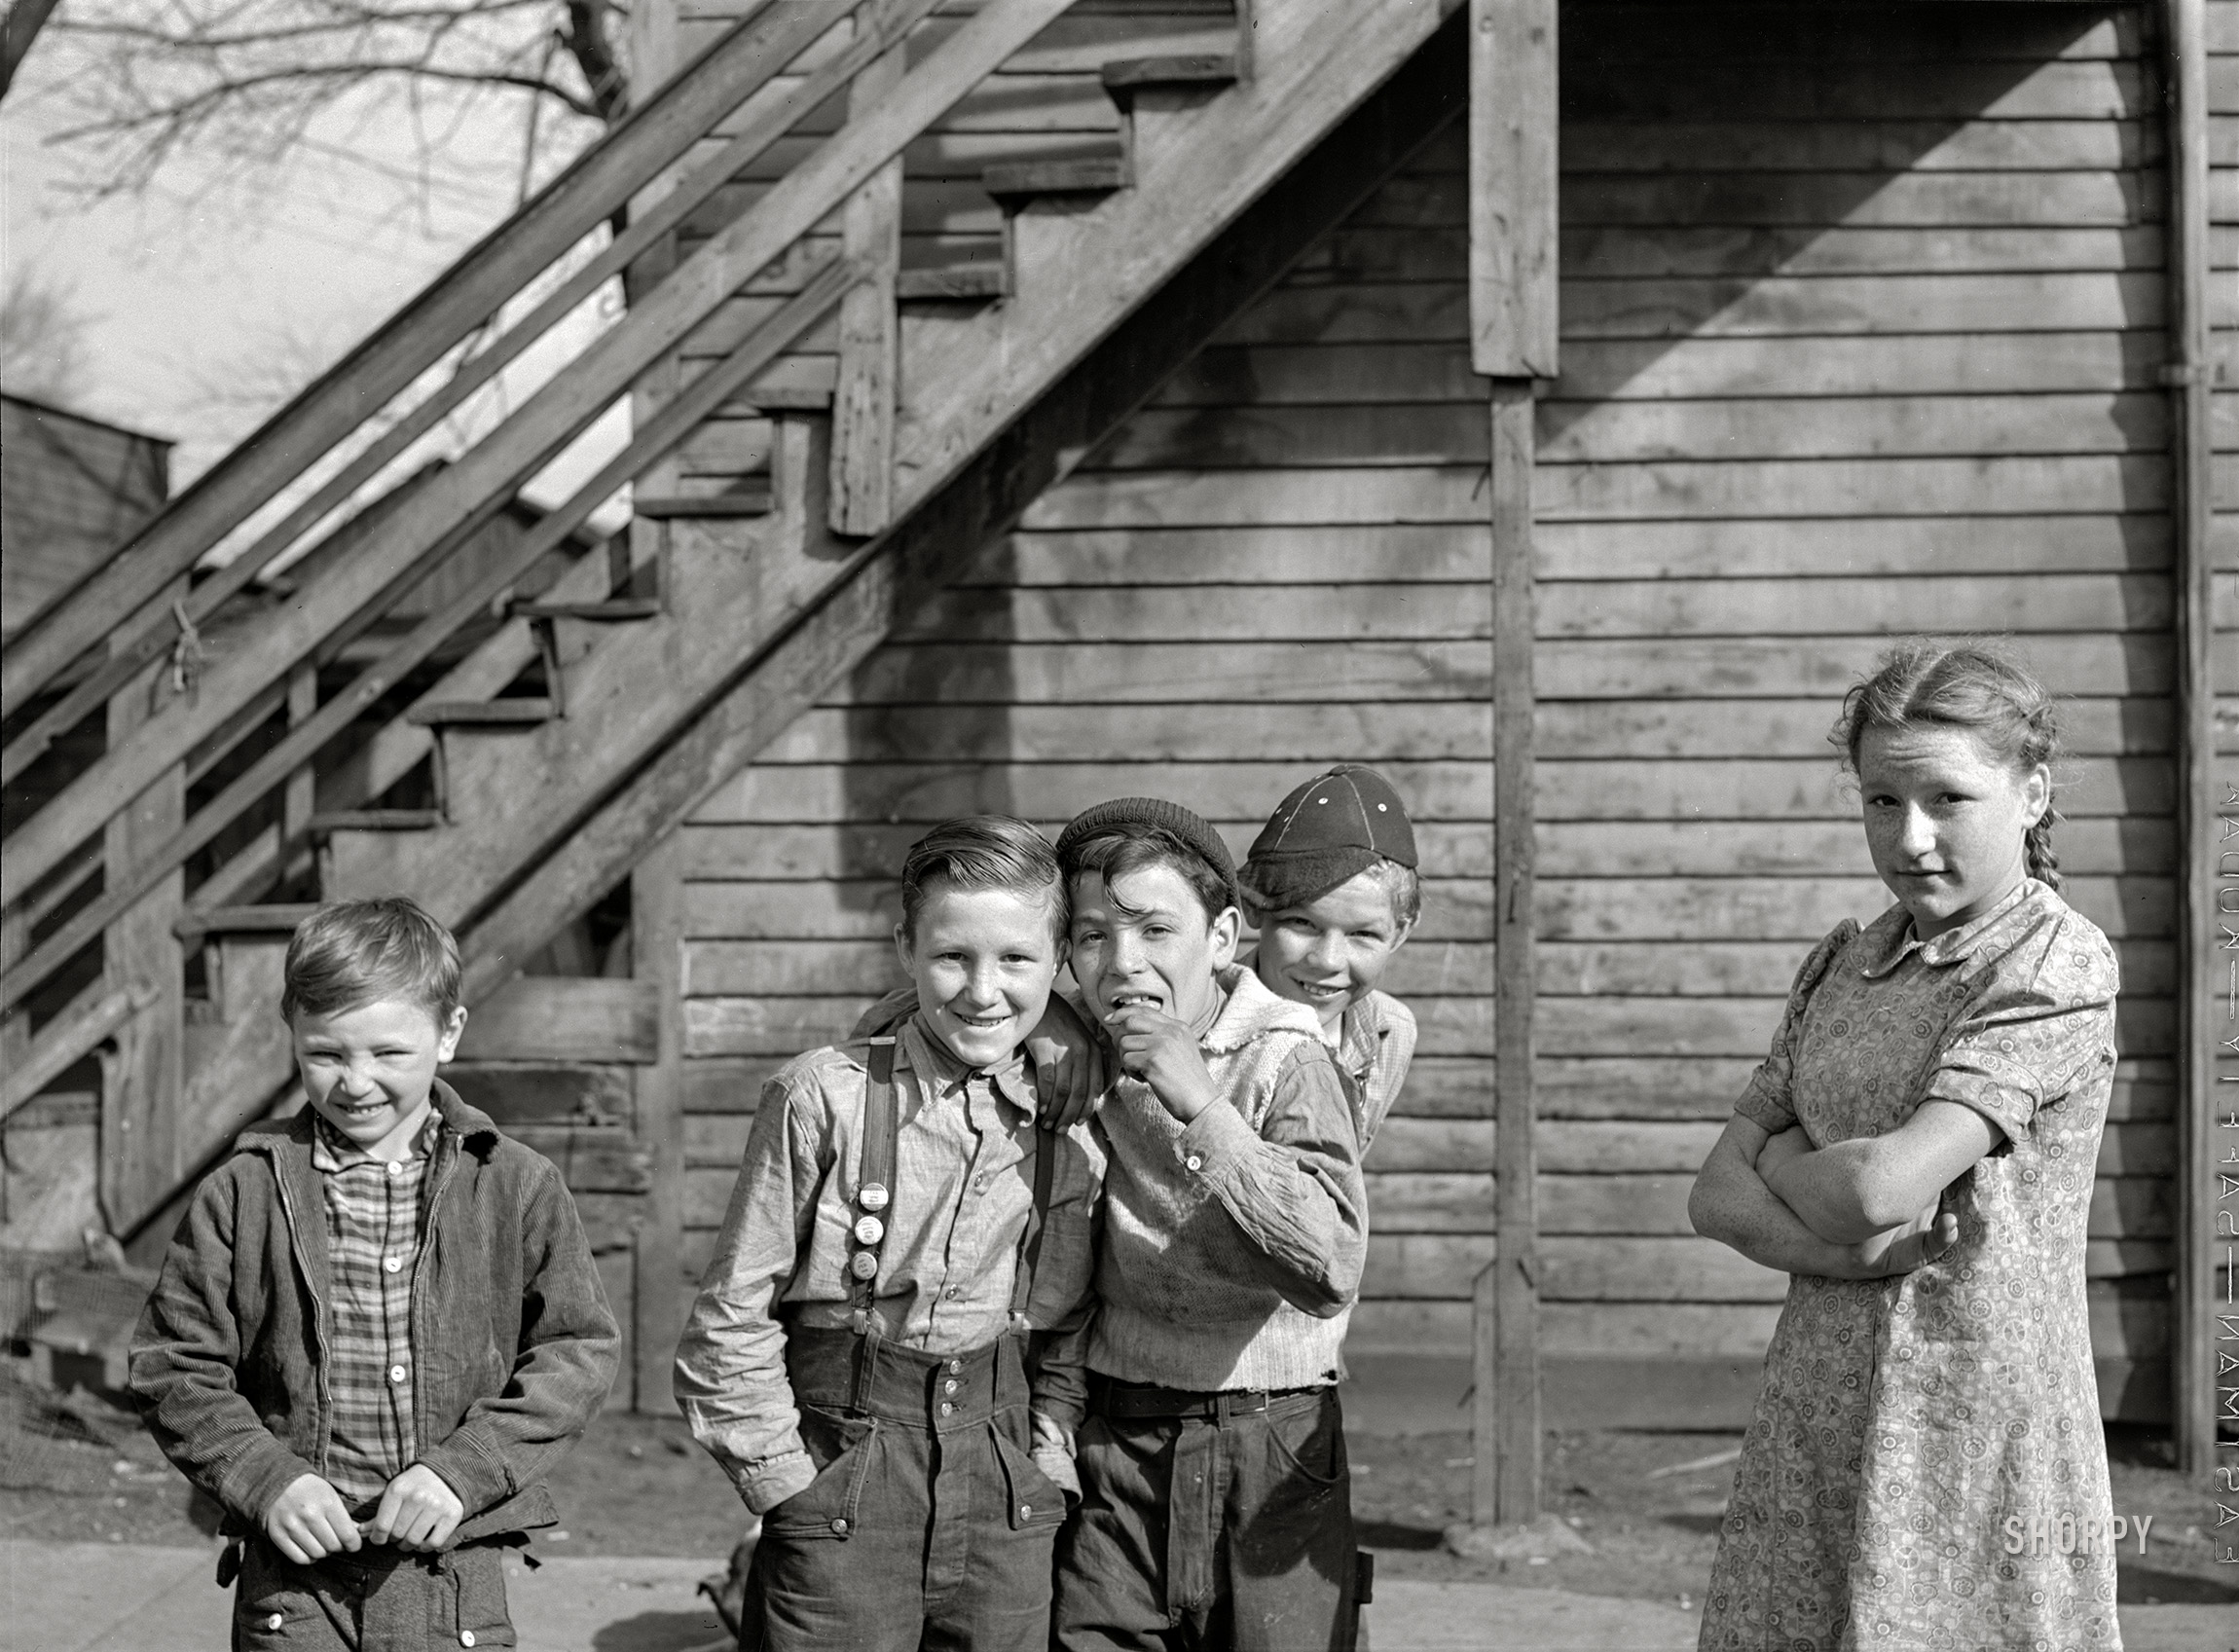 April 1940. "Children. Dubuque, Iowa" is all it says here. Medium format acetate negative by John Vachon for the Resettlement Administration. View full size.